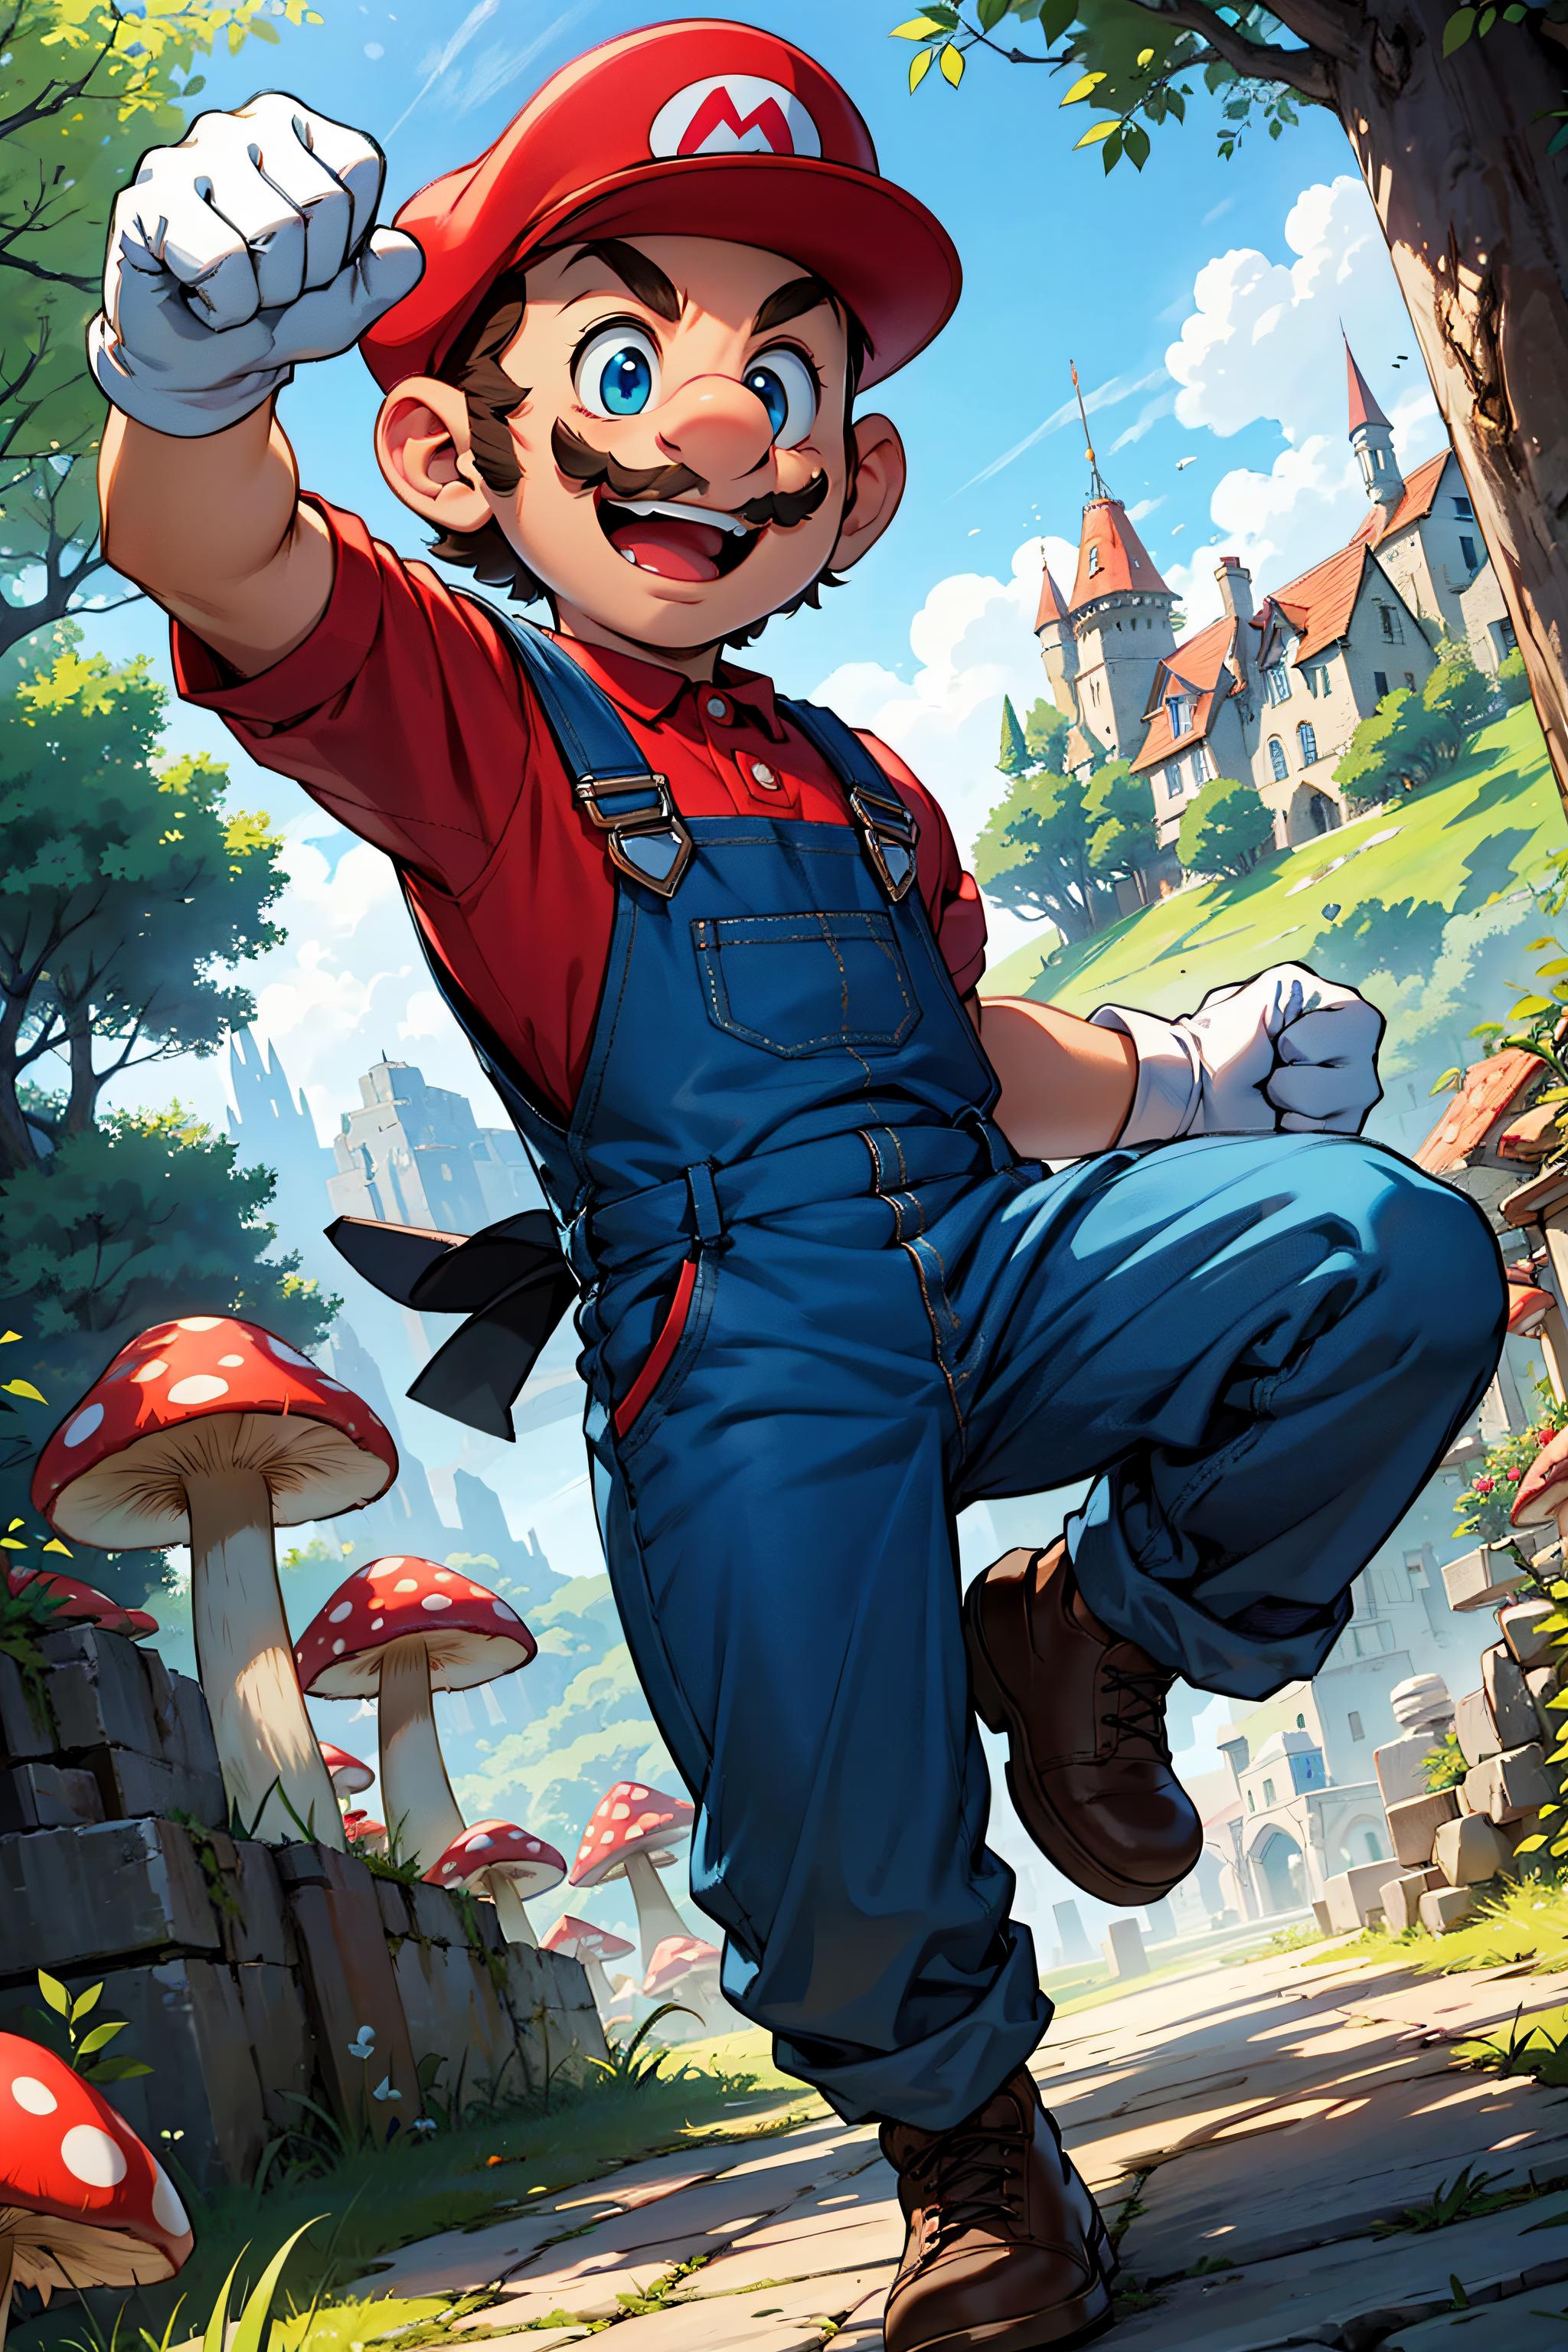 A cartoon illustration of Mario, the plumber, in a blue overalls and suspenders, holding a mushroom over his head.